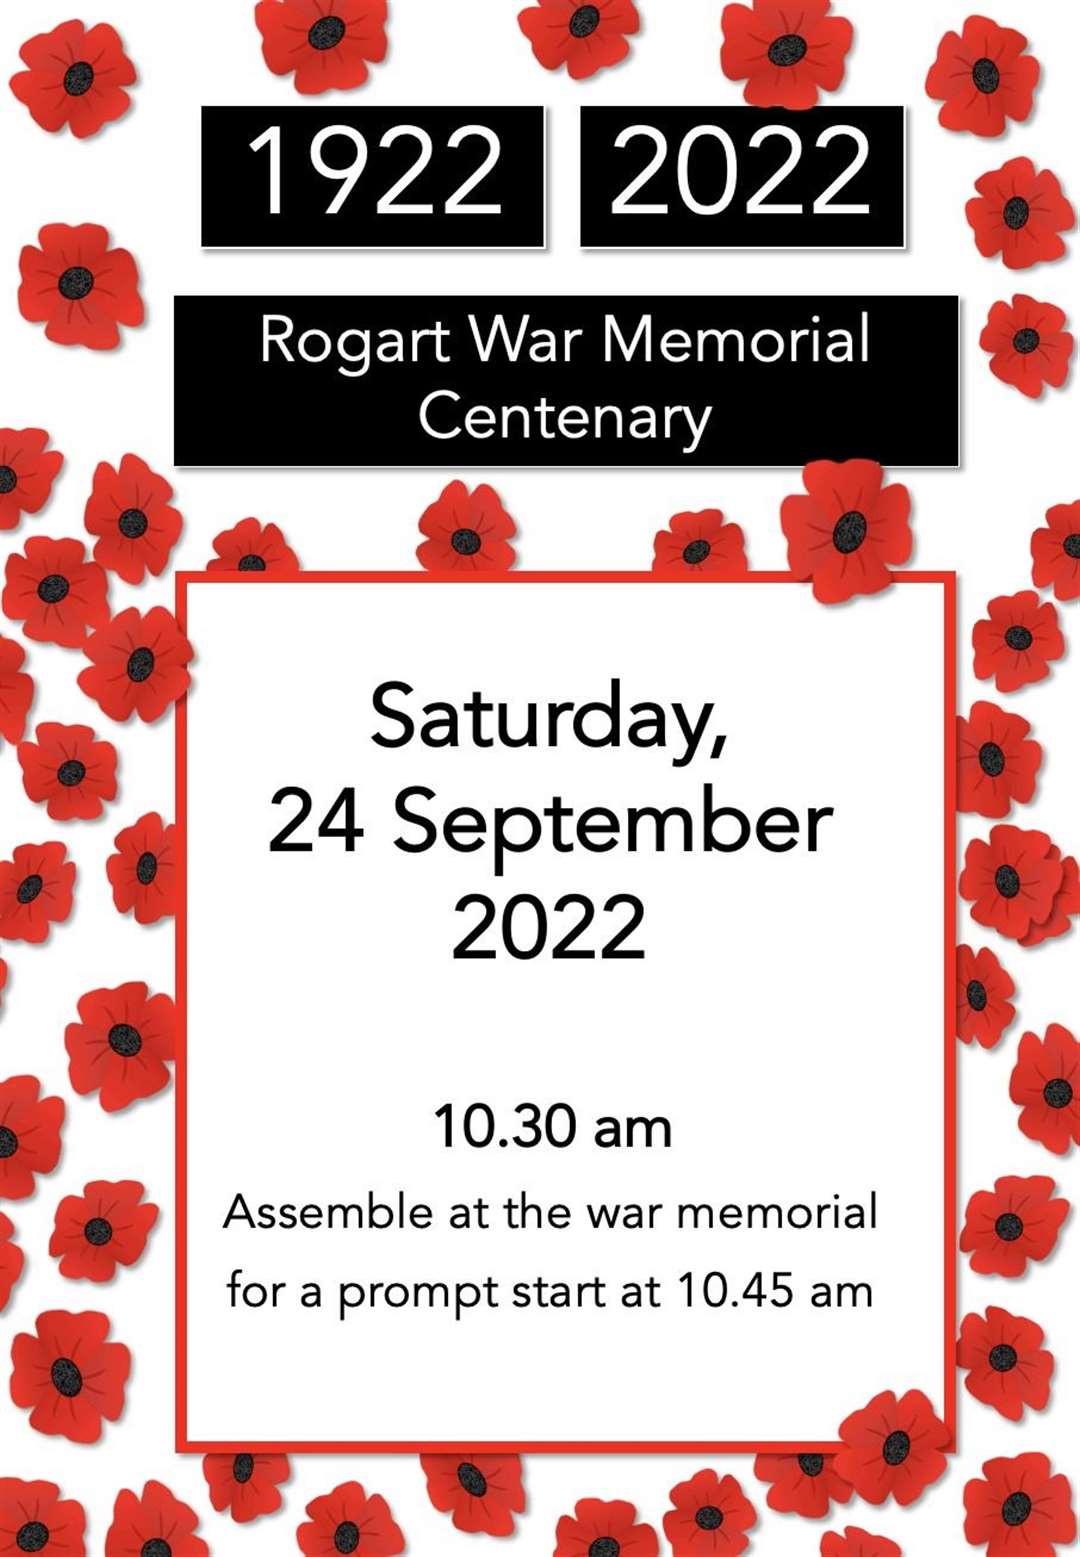 Rogart is to commemorate the 100th anniversary of its war memorial.